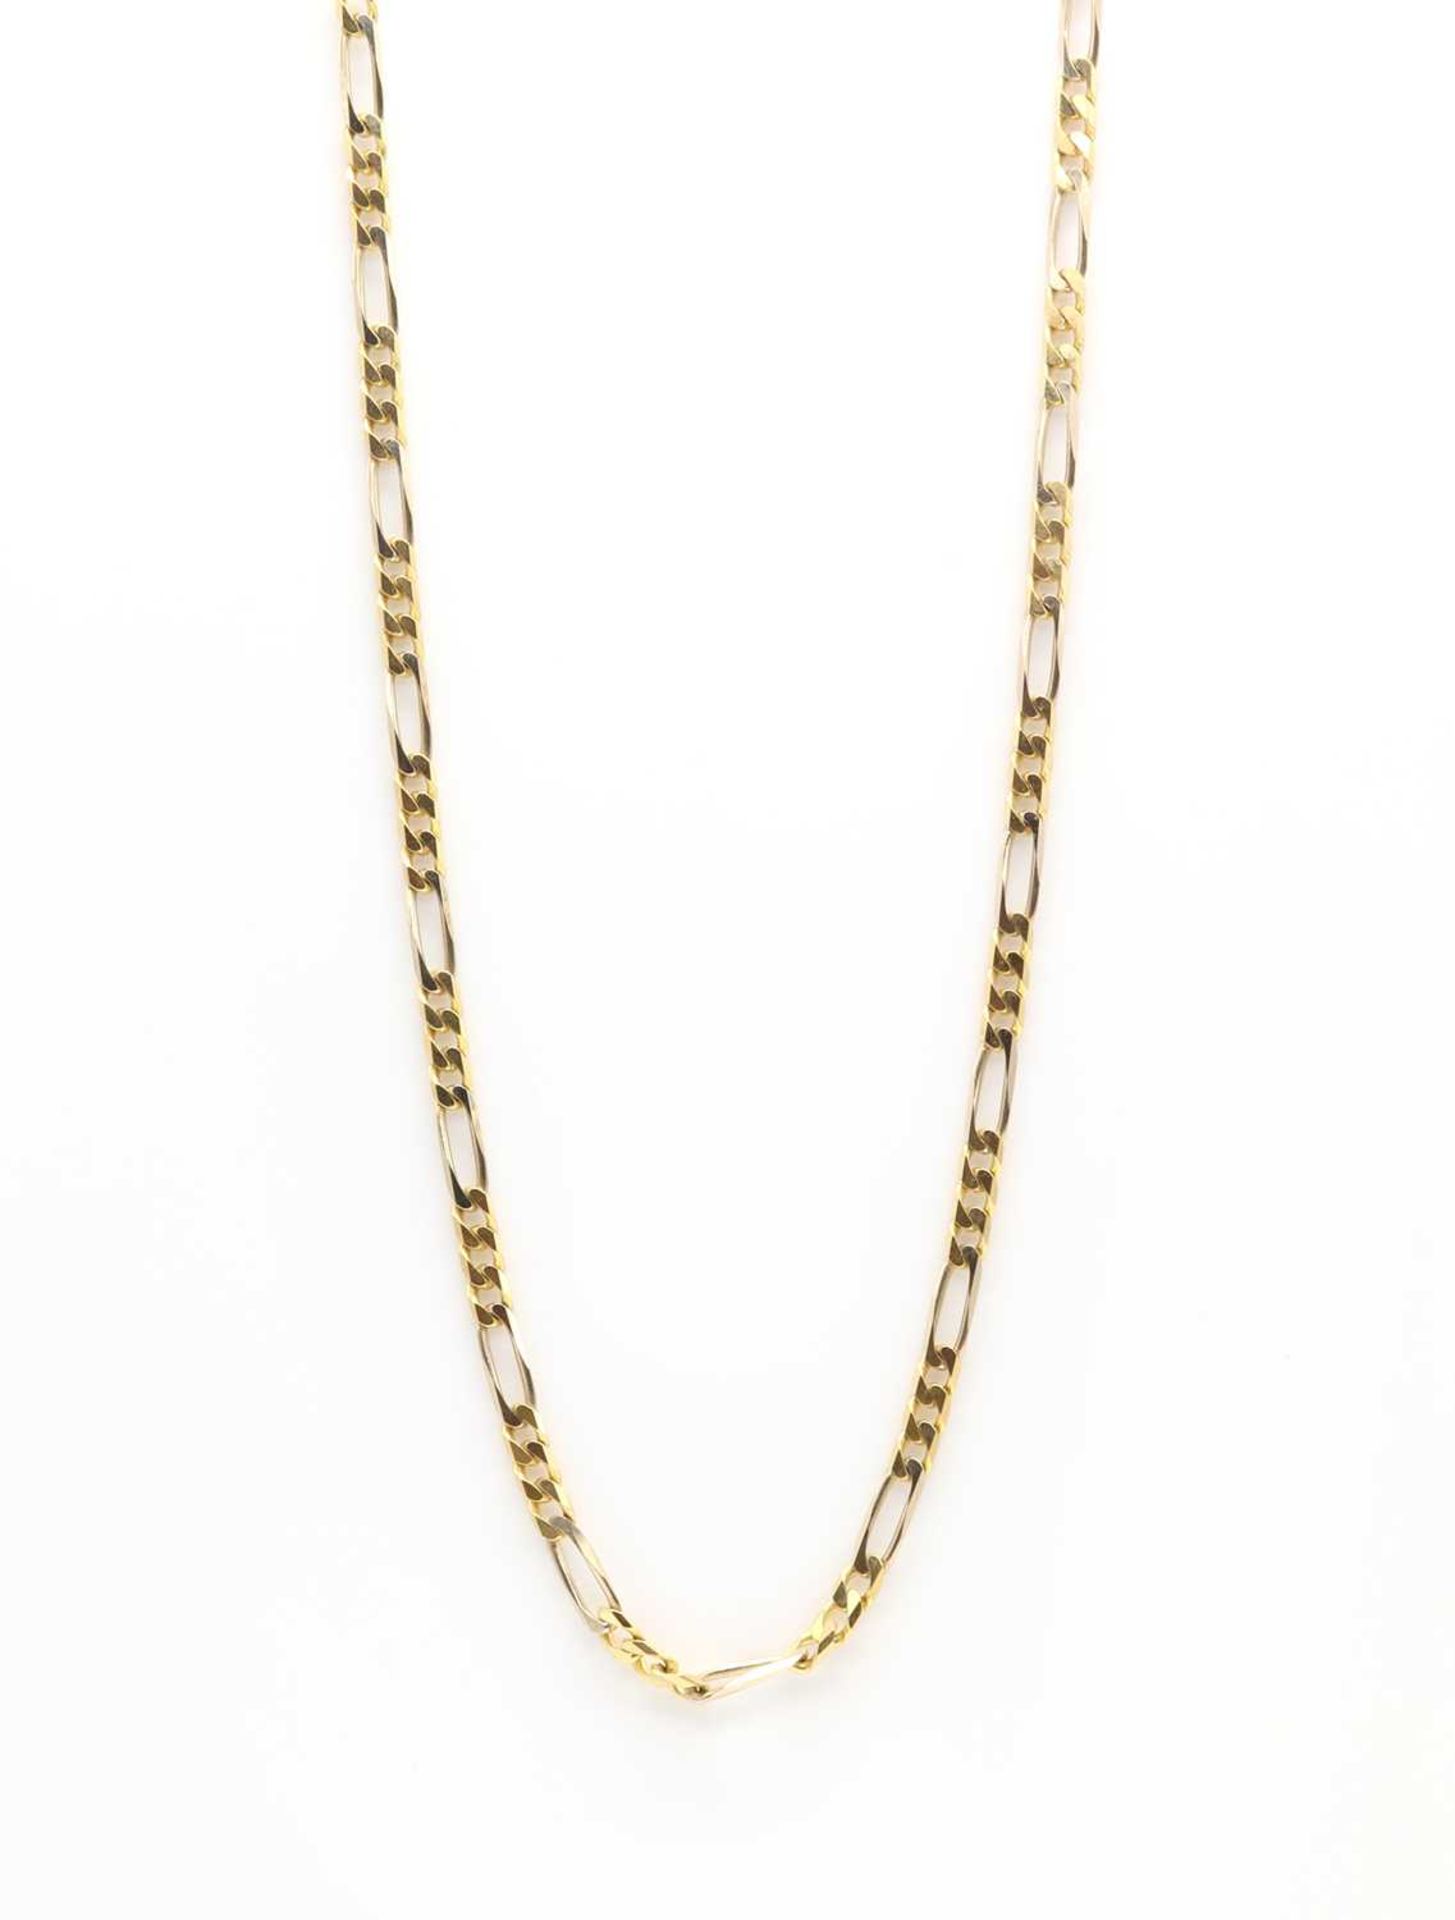 A gold figaro link chain,